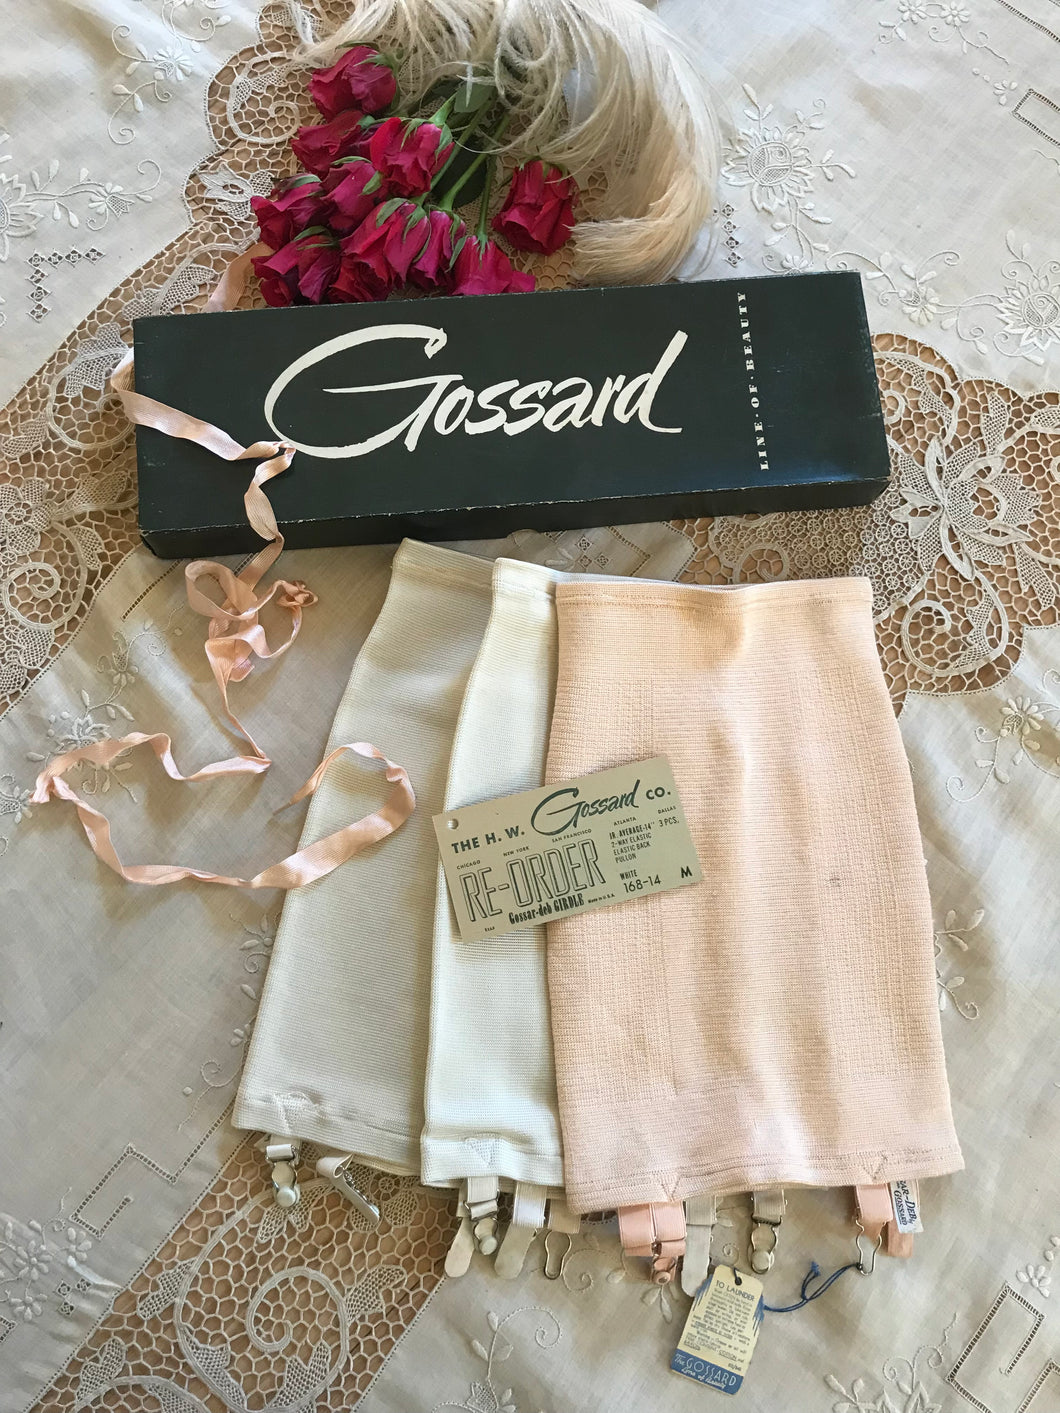 Authentic Deadstock 1940’s Vintage 3 piece Roll On Girdle set by Gossard